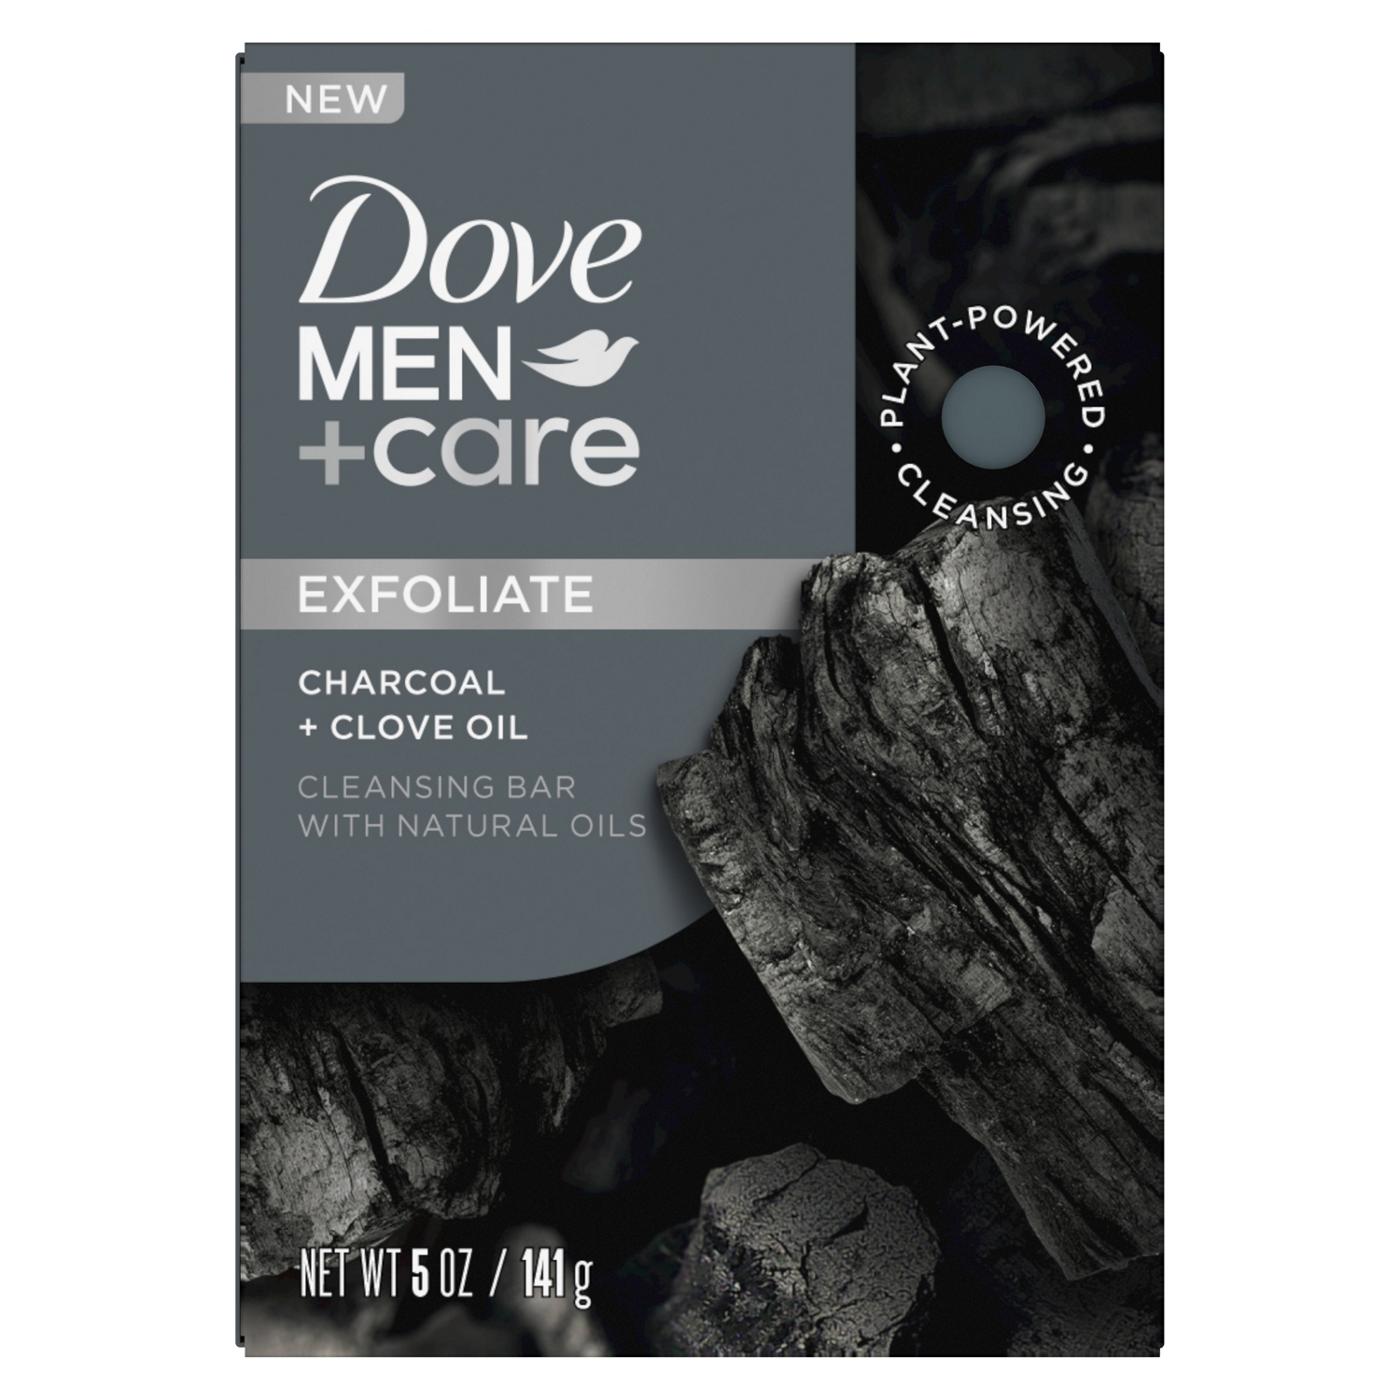 Dove Men+Care Exfoliate Cleansing Bar - Charcoal + Clove Oil; image 1 of 3